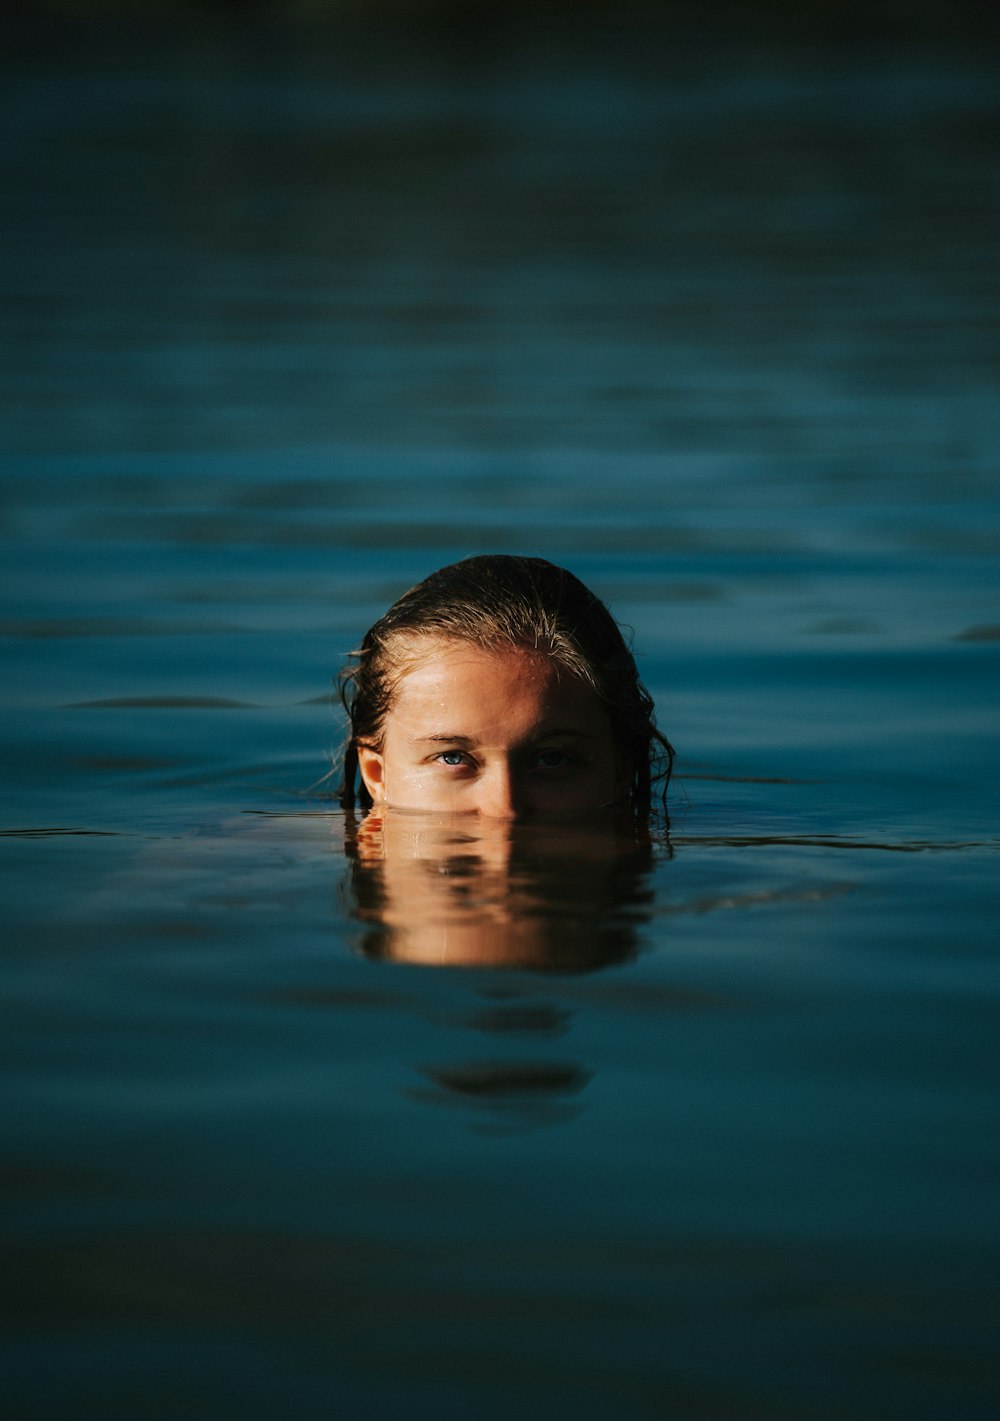 a woman swimming in a body of water